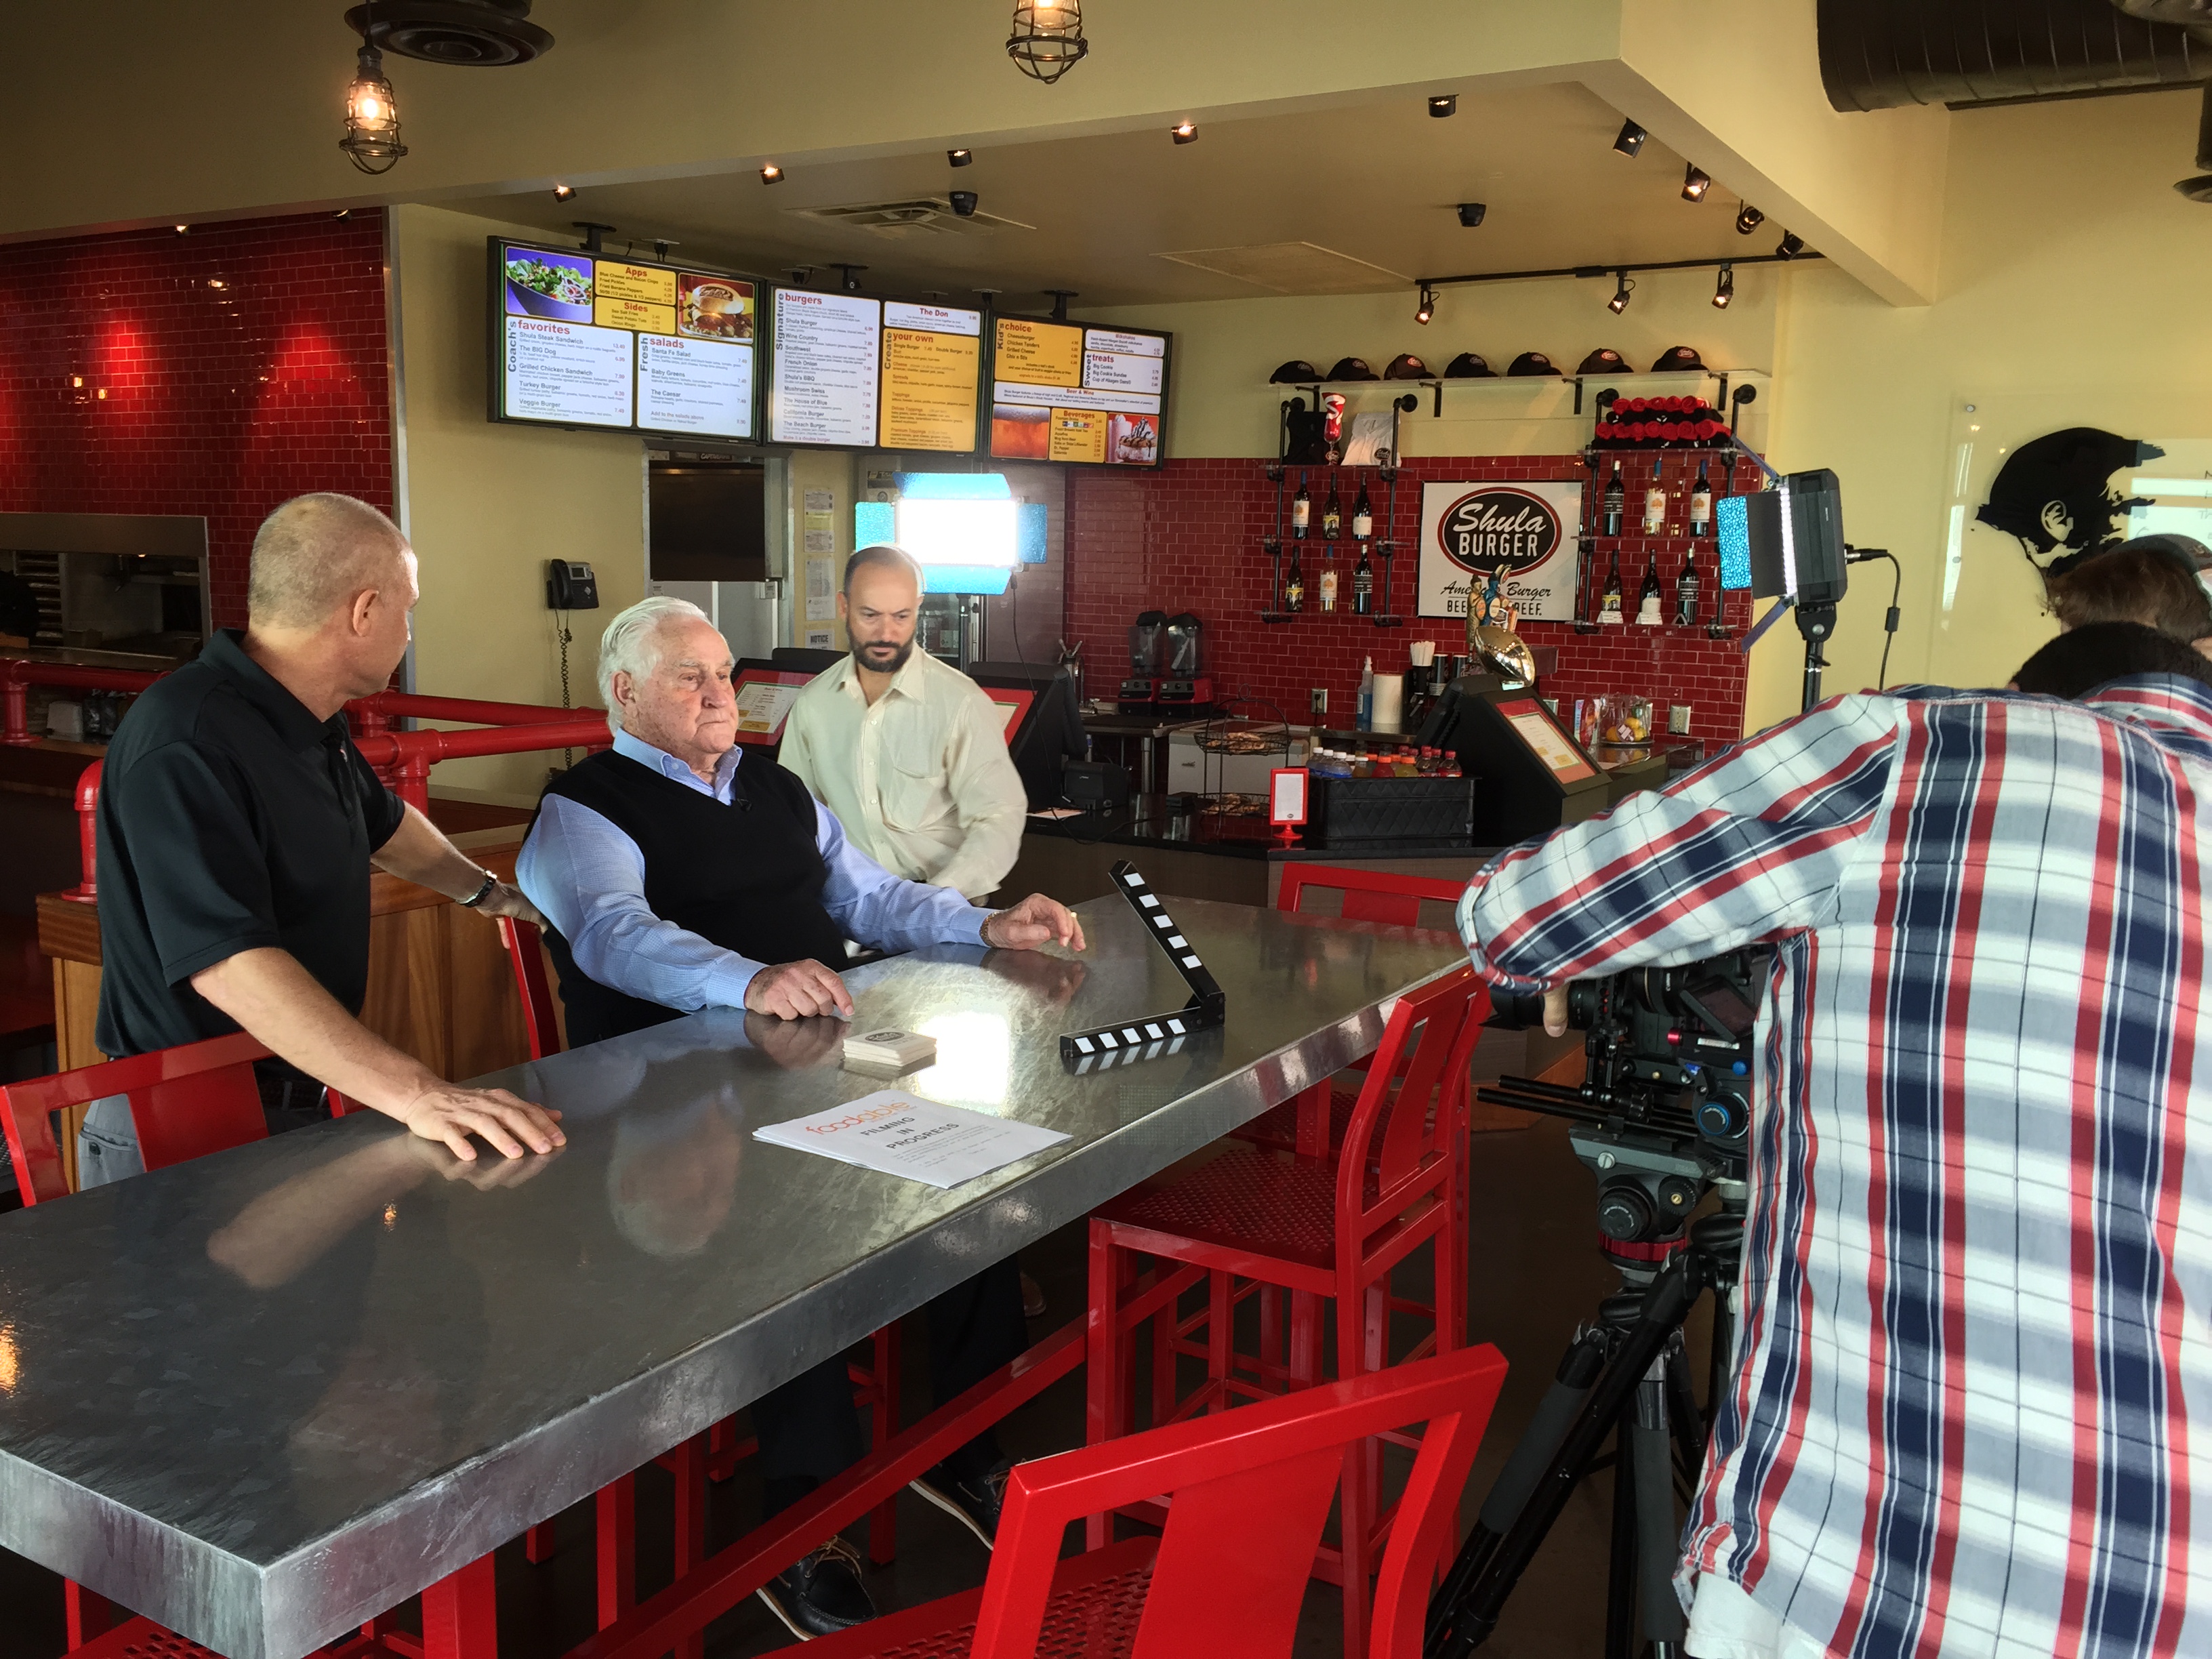 BTS of Fast Casual Nation - yes that is Don Shula